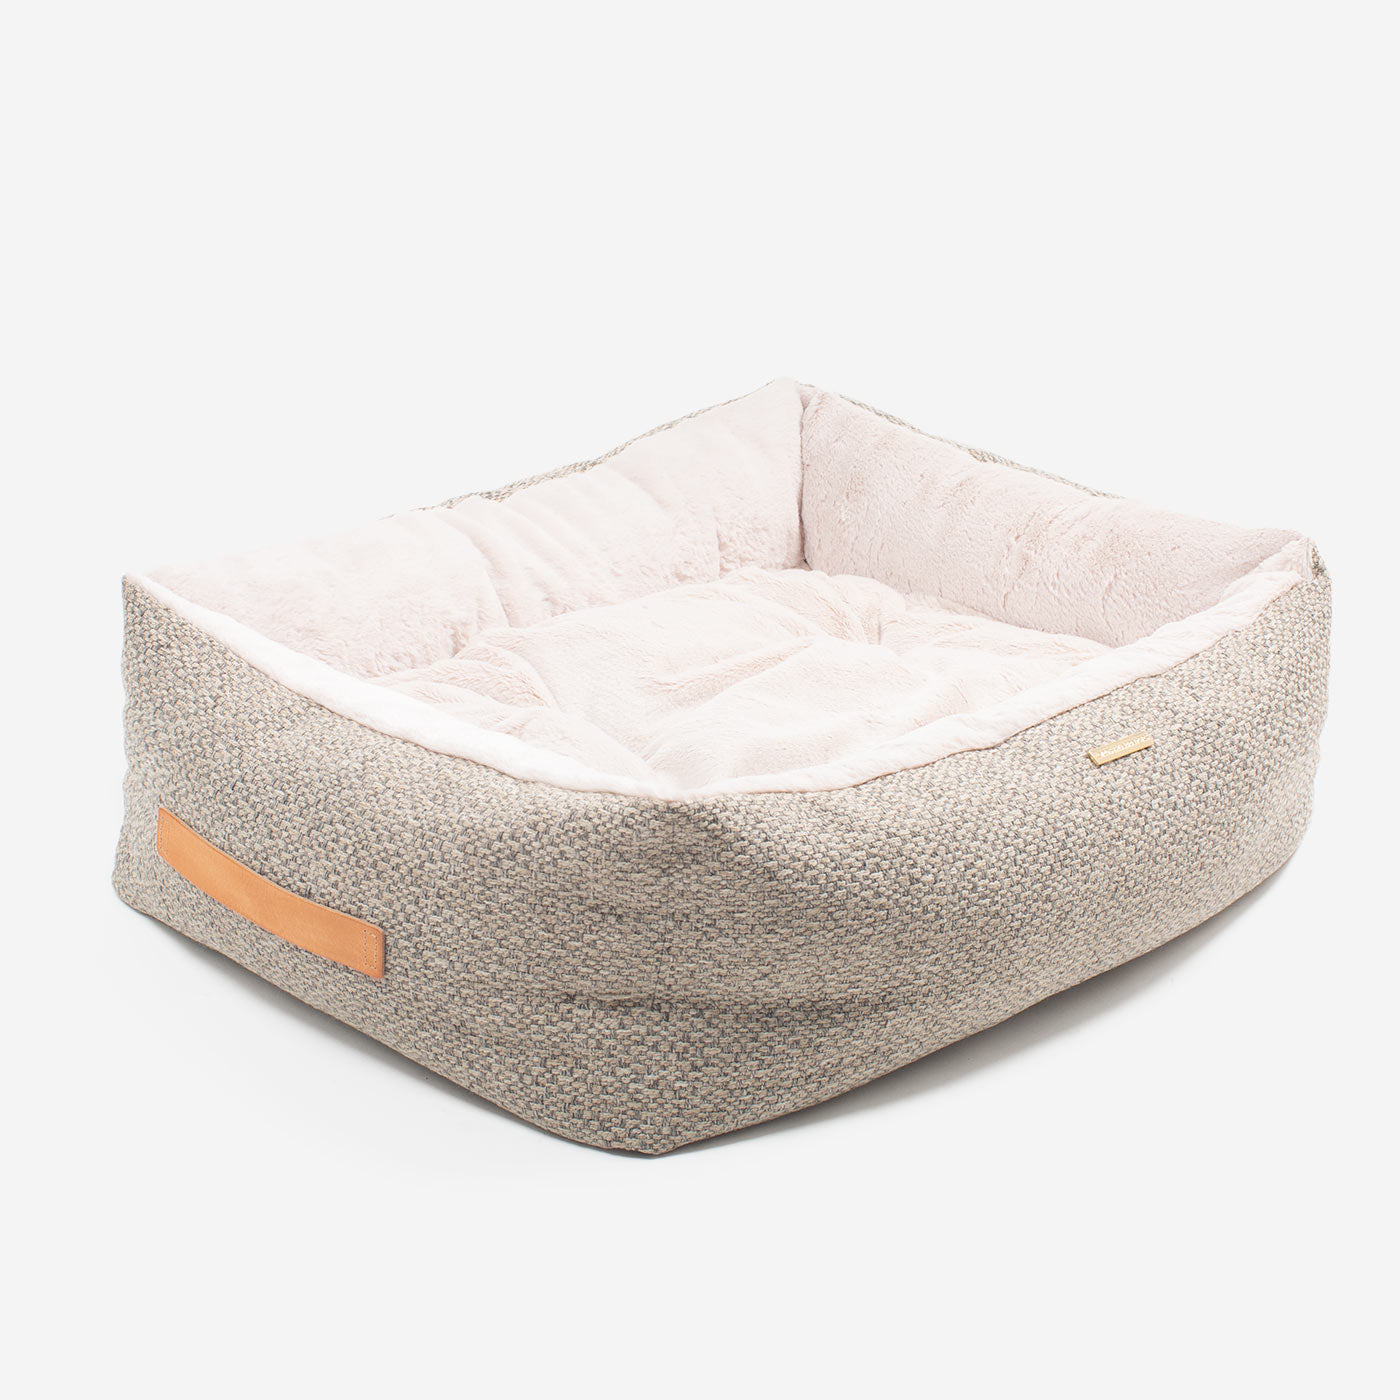 Discover This Luxurious Box Bed For Dogs, Made Using Beautiful Herdwick Fabric To Craft The Perfect Dog Box Bed! In Stunning Pebble, Available Now at Lords & Labradors 